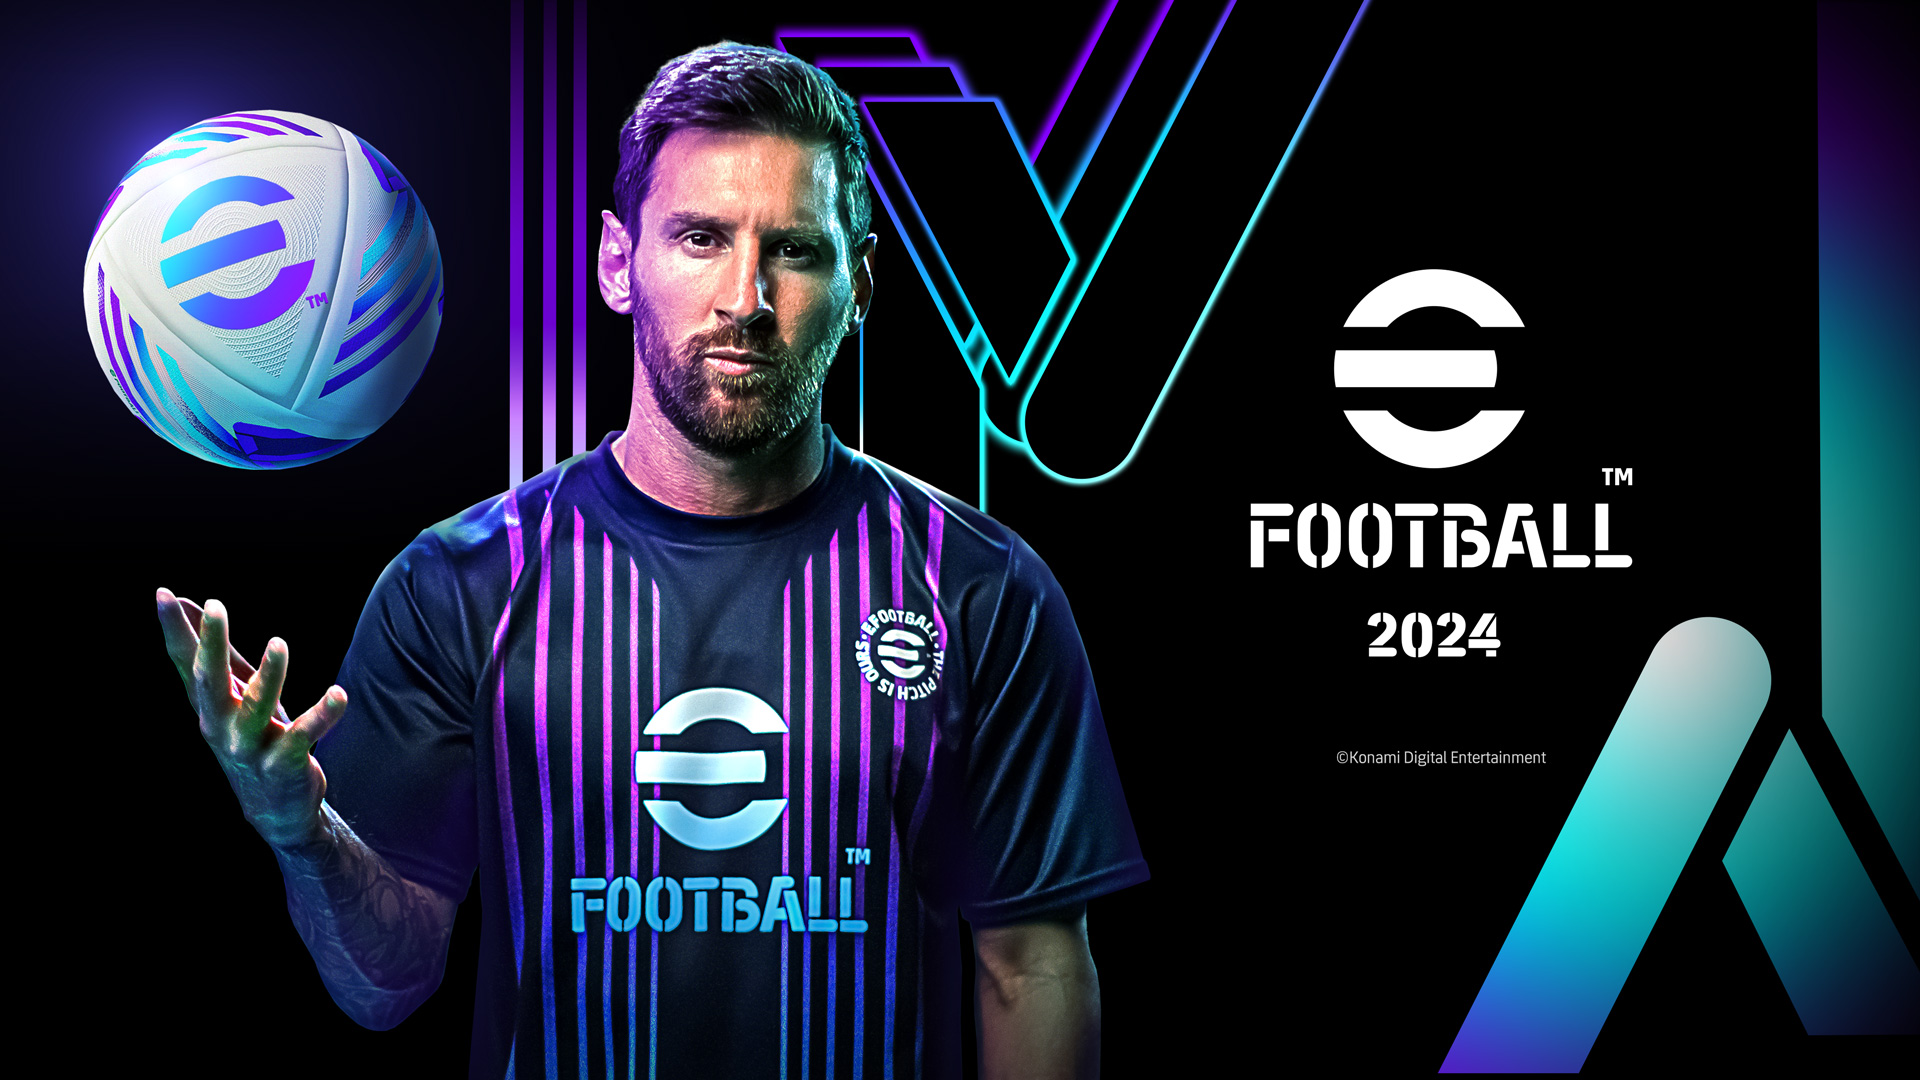 Football Manager 2023 Console - IGN